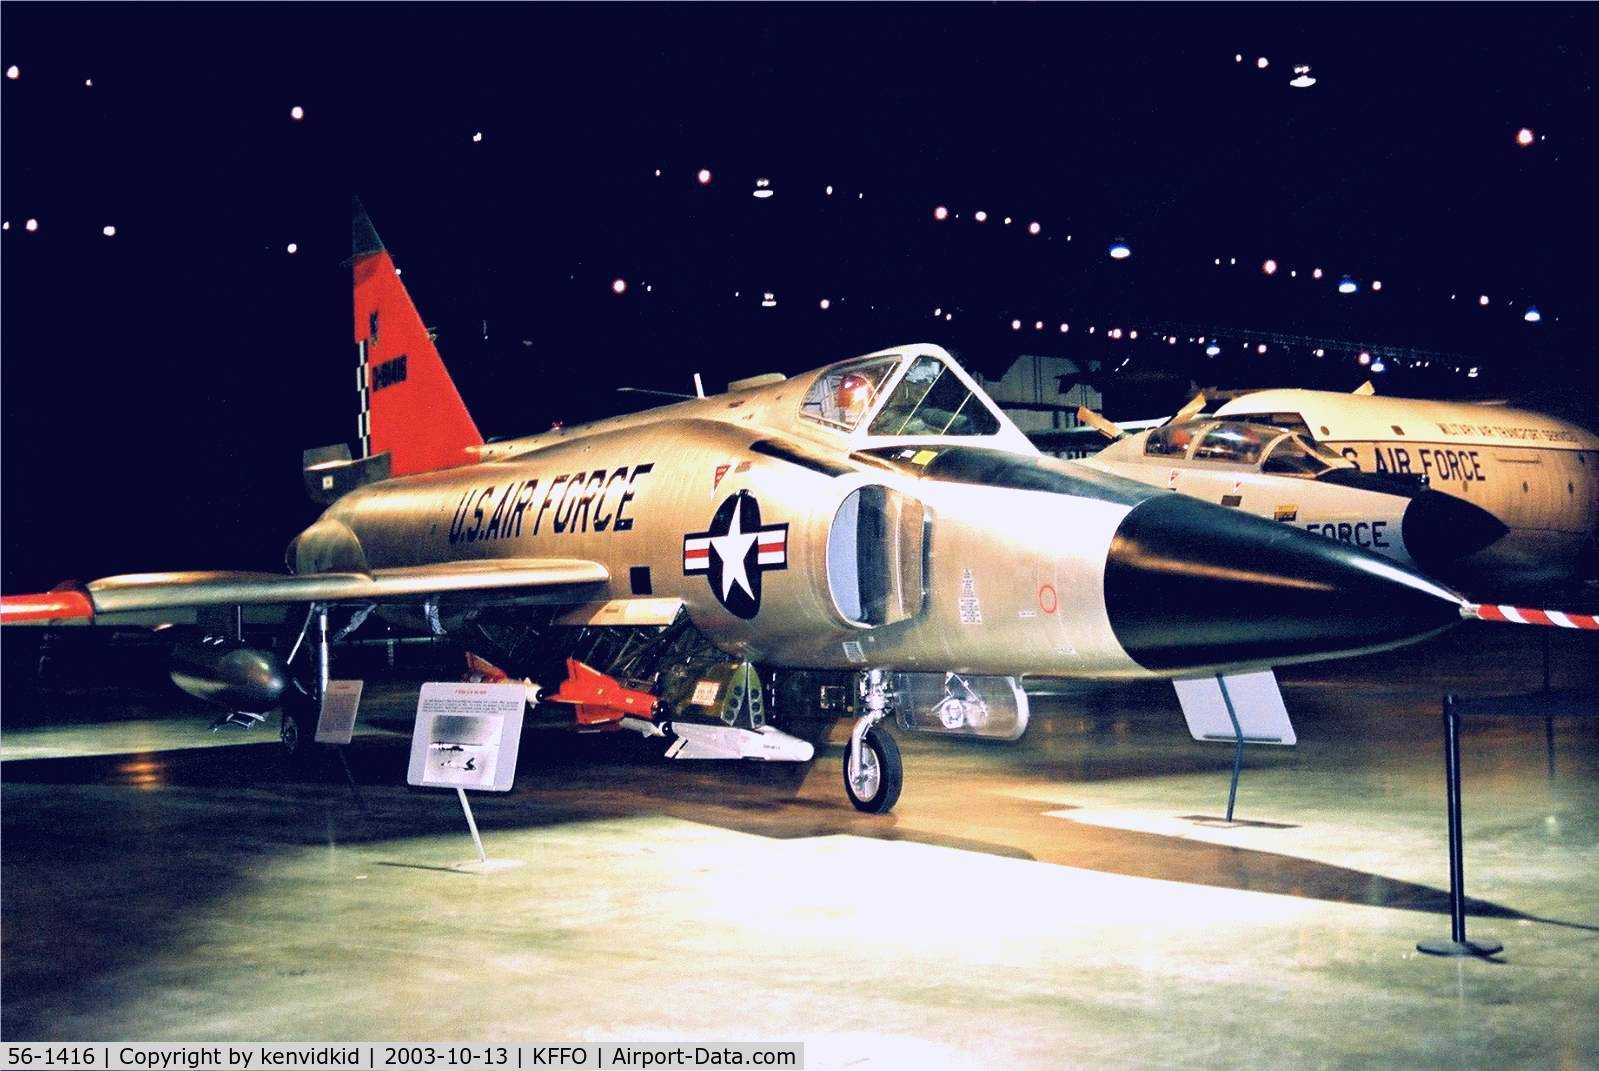 56-1416, 1956 Convair F-102A Delta Dagger C/N 8-10-363, At the Museum of the United States Air Force Dayton Ohio.